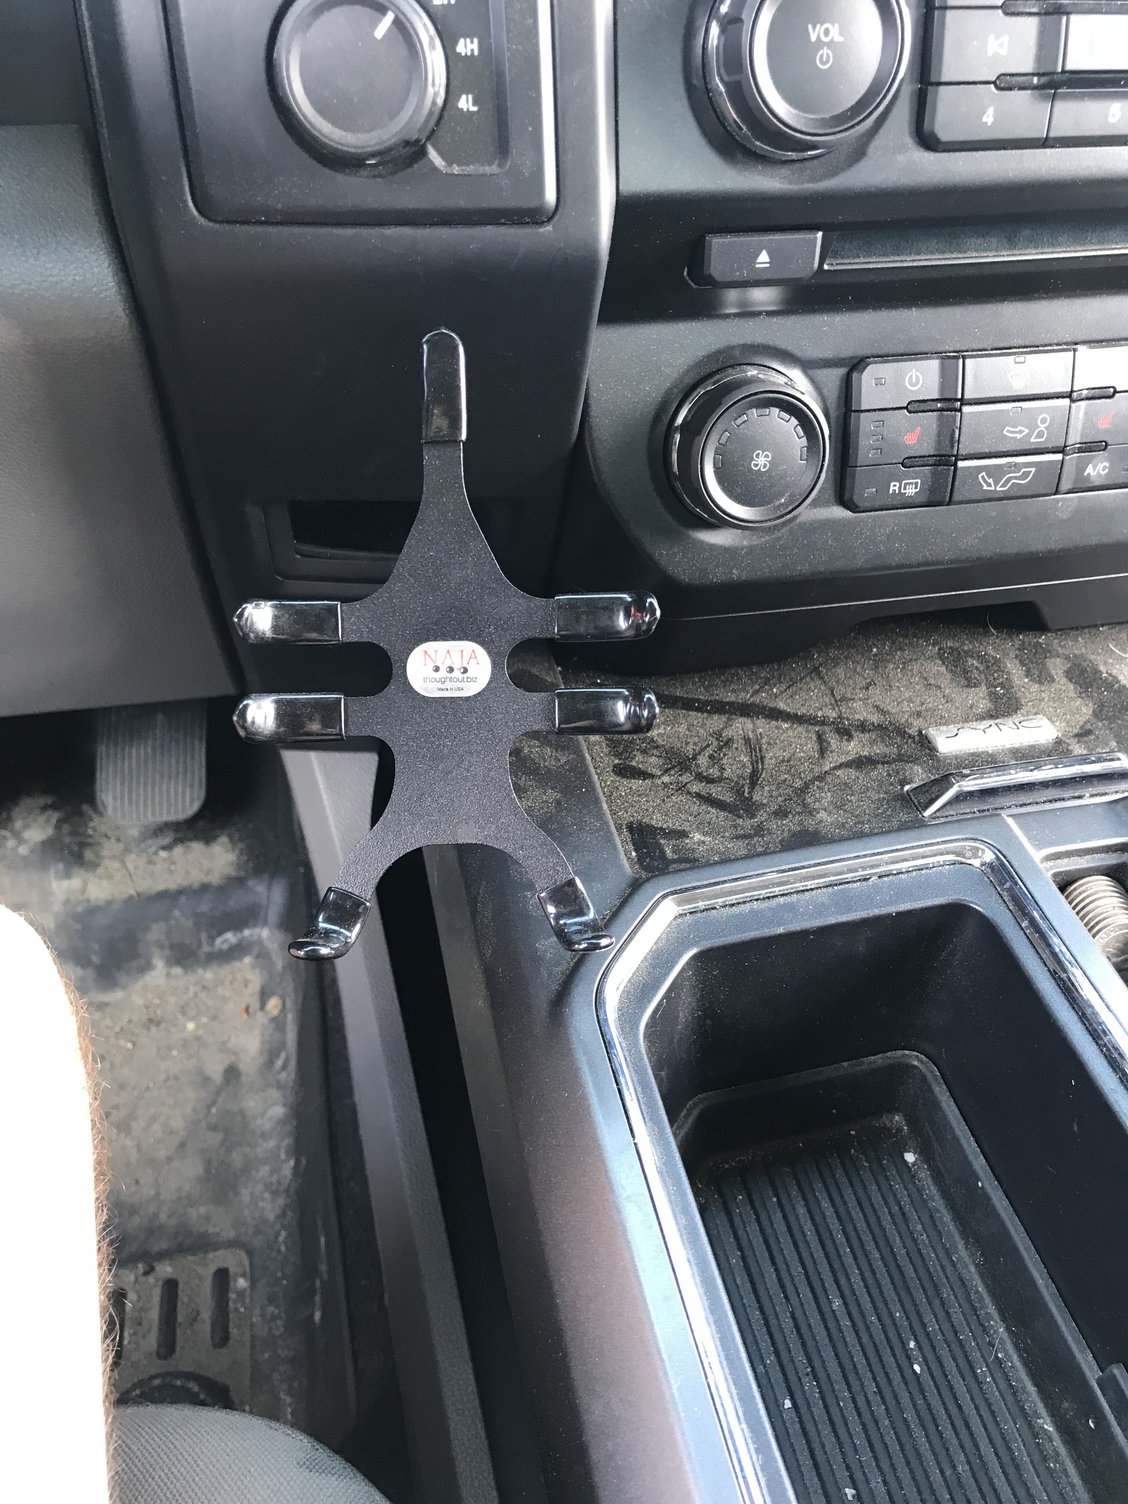 Best Cell Phone holder for the F150 Page 25 Ford F150 Forum